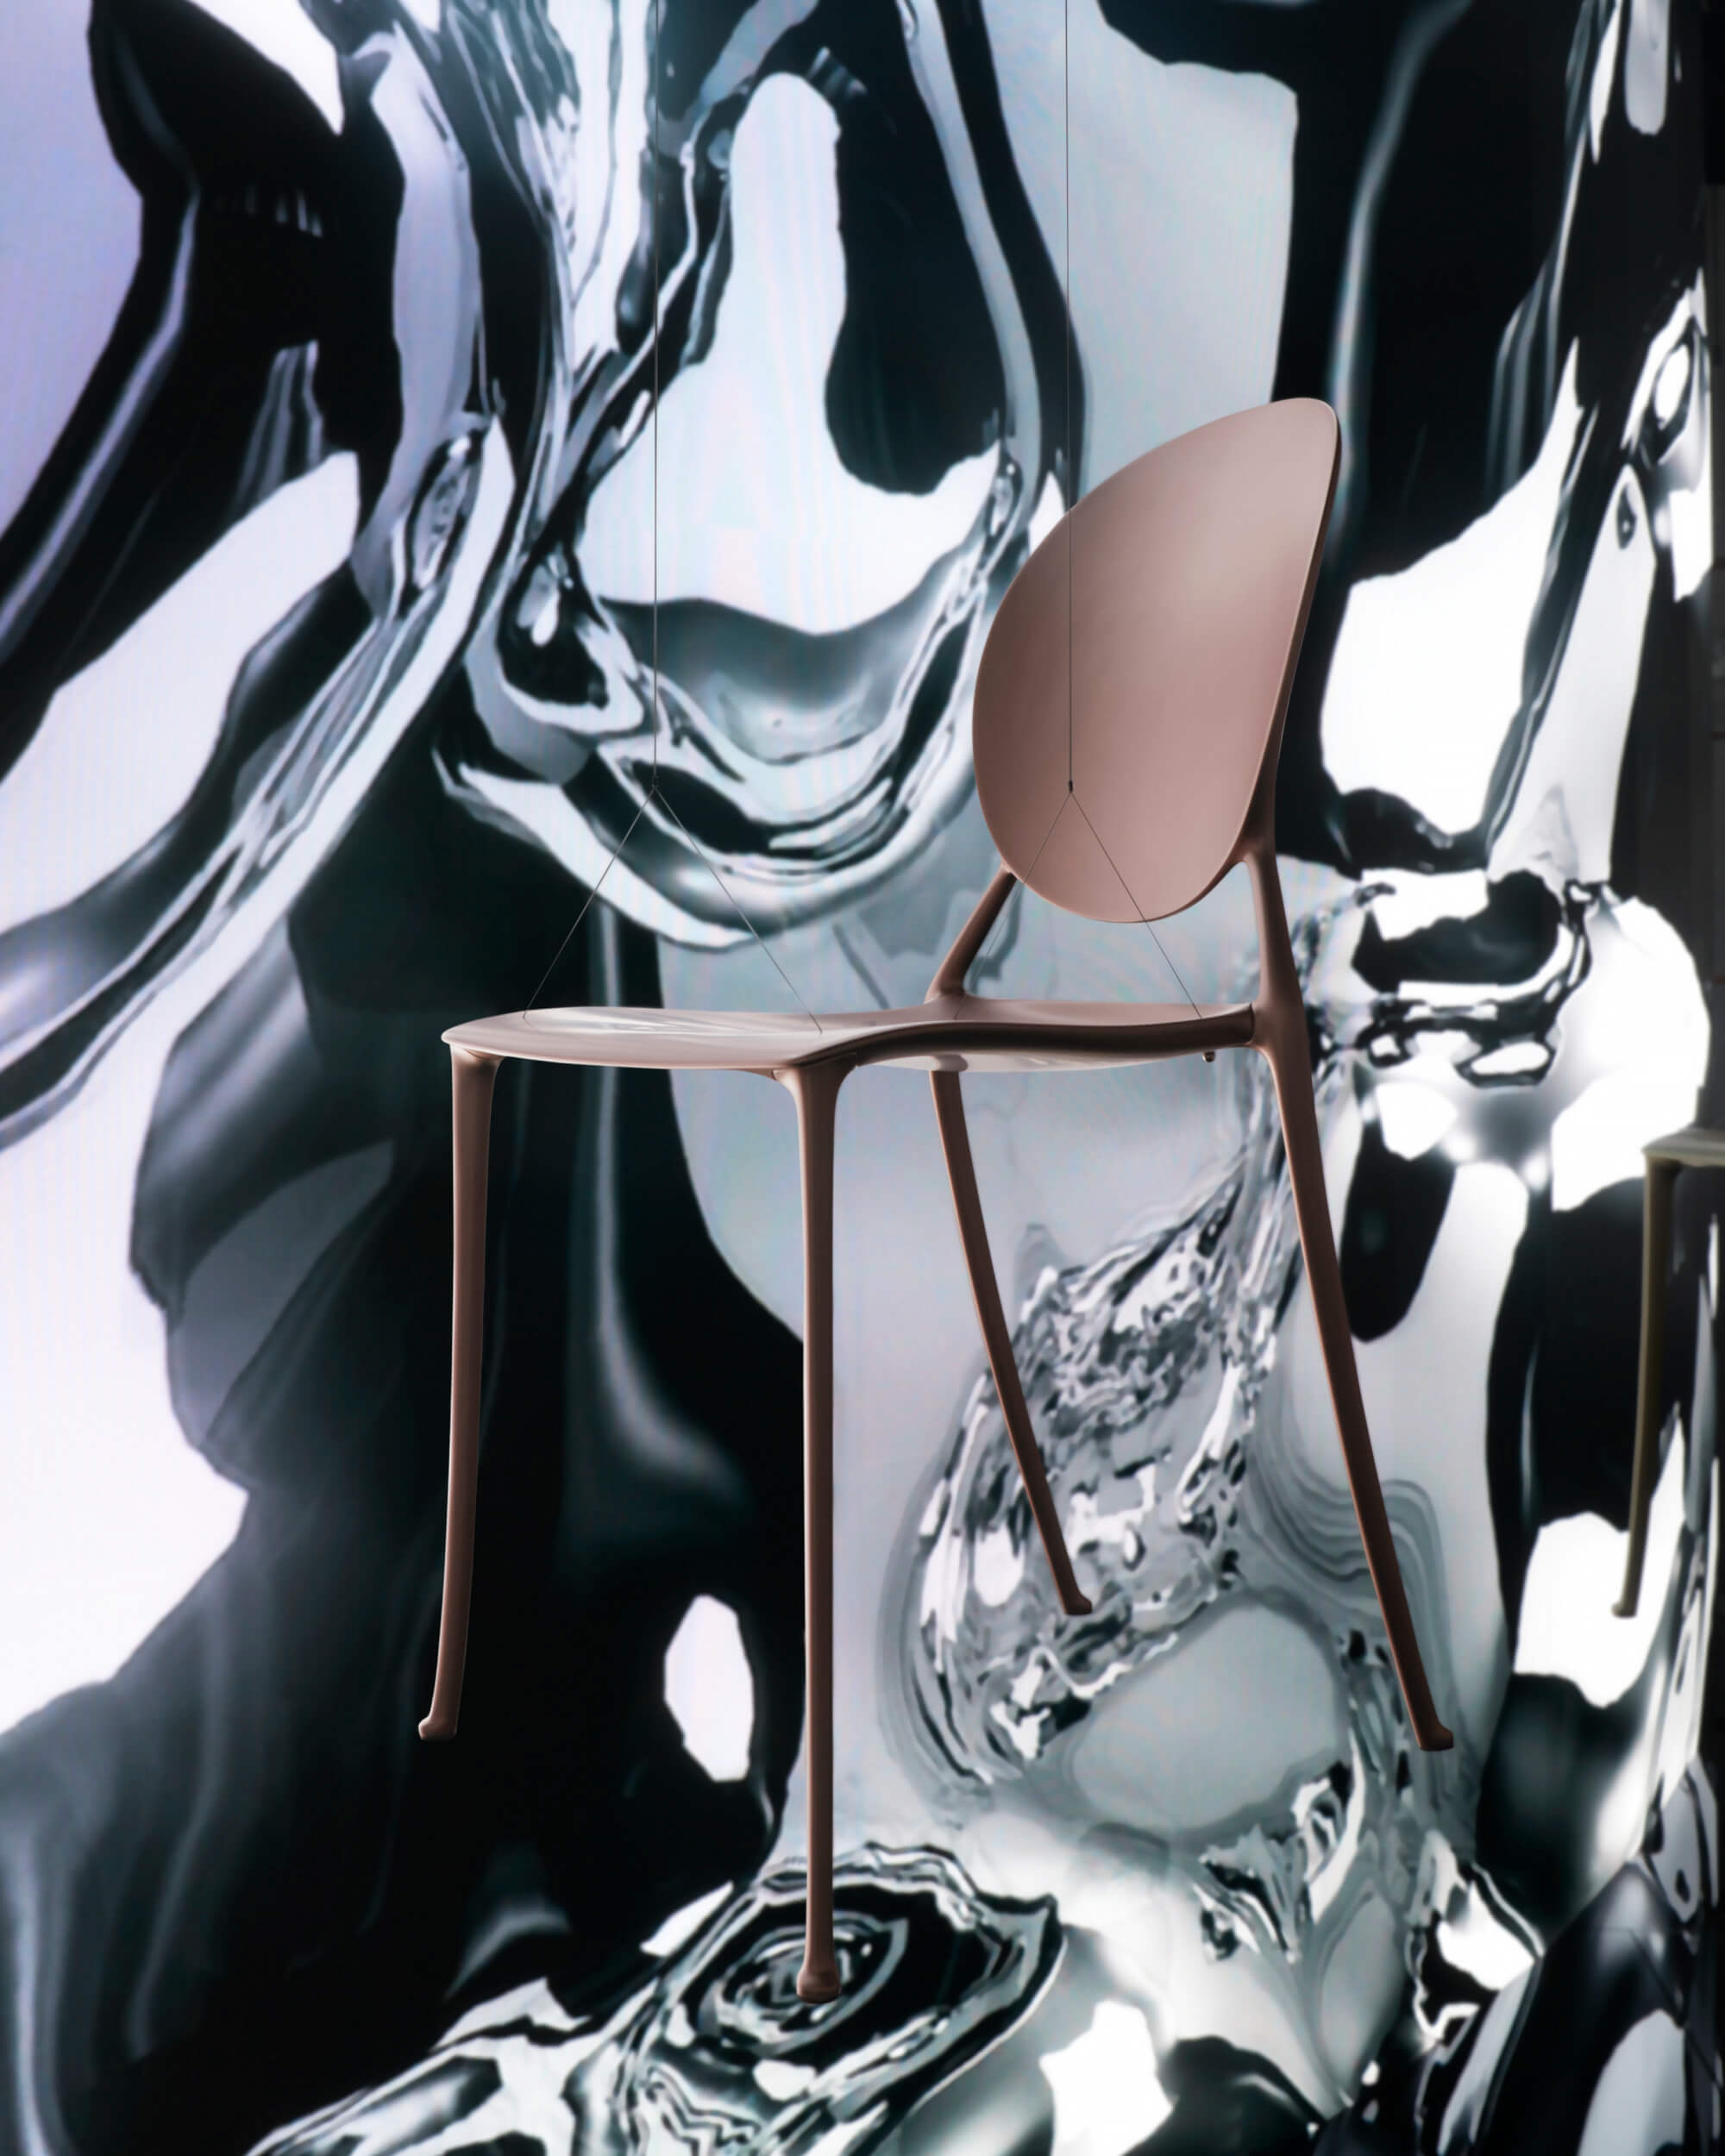 DIOR BY STARCK - a poetic installation - 